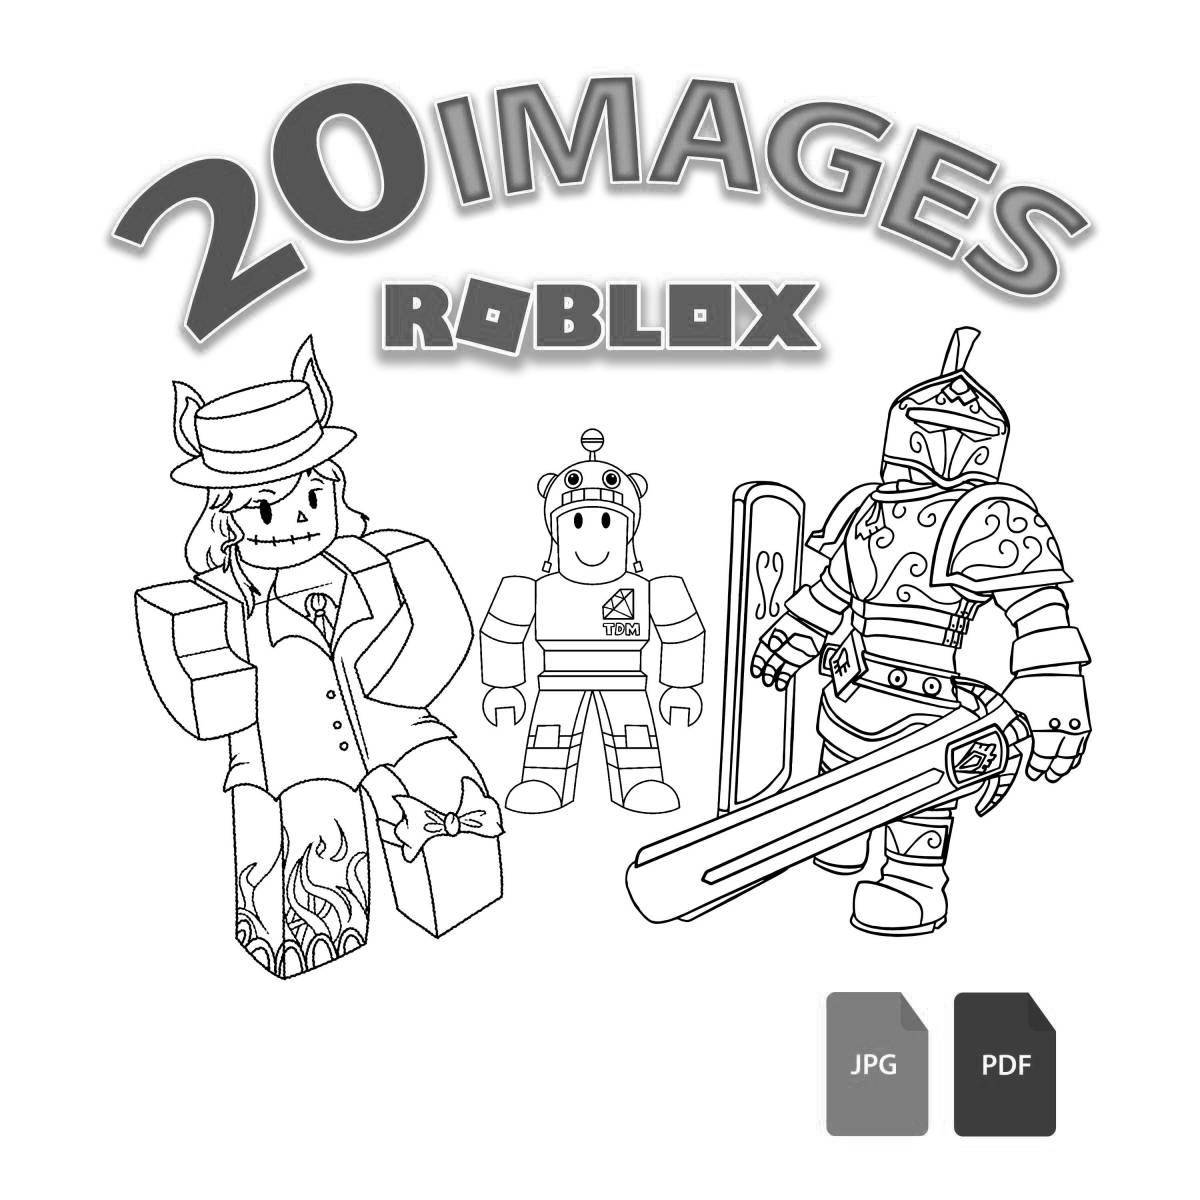 Charming roblox brookhaven coloring page